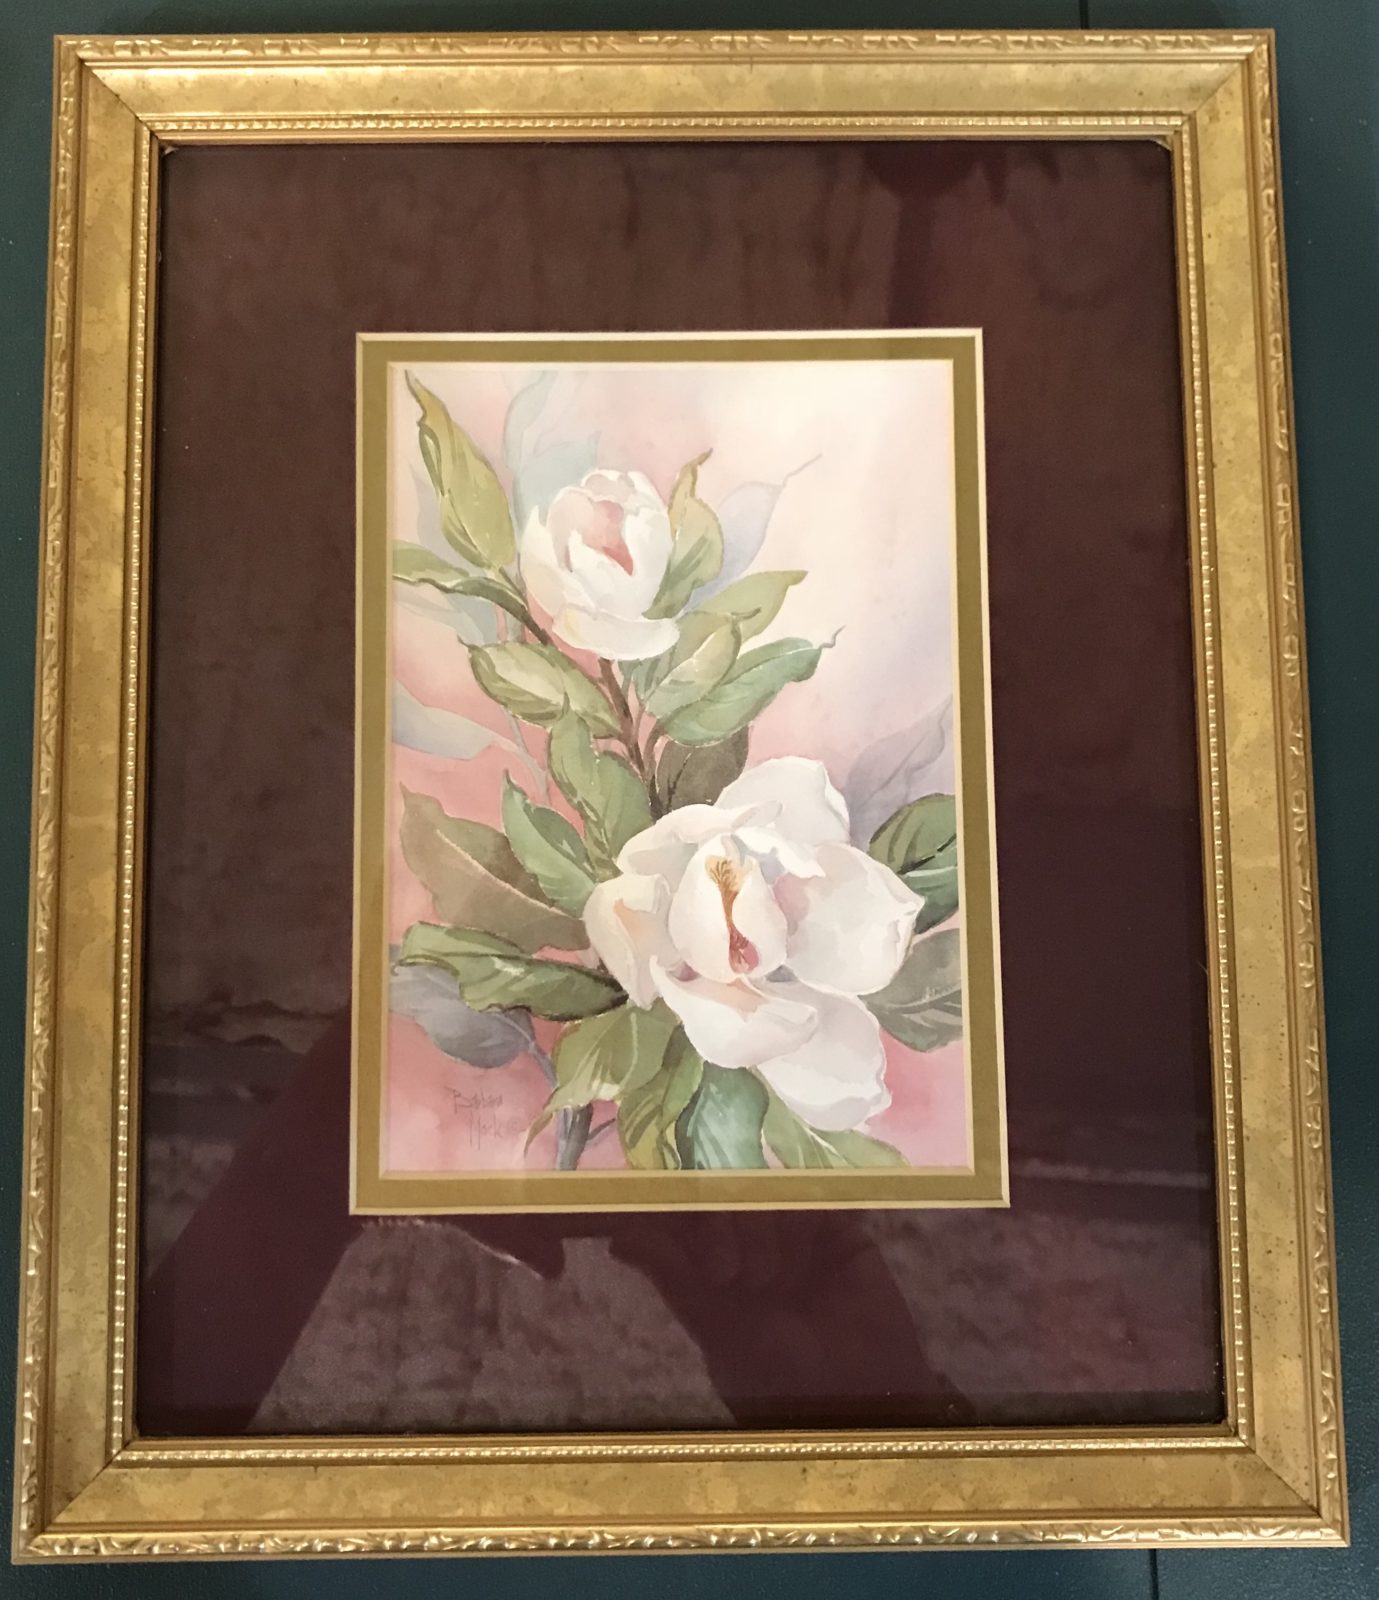 Magnolia flower print • We love magnolias! This gorgeous print is double matted in gold and cranberry and sits in a 10x12 gold frame. This lovely piece will add sweet southern charm to any decor! Come see it in person to appreciate its beauty!